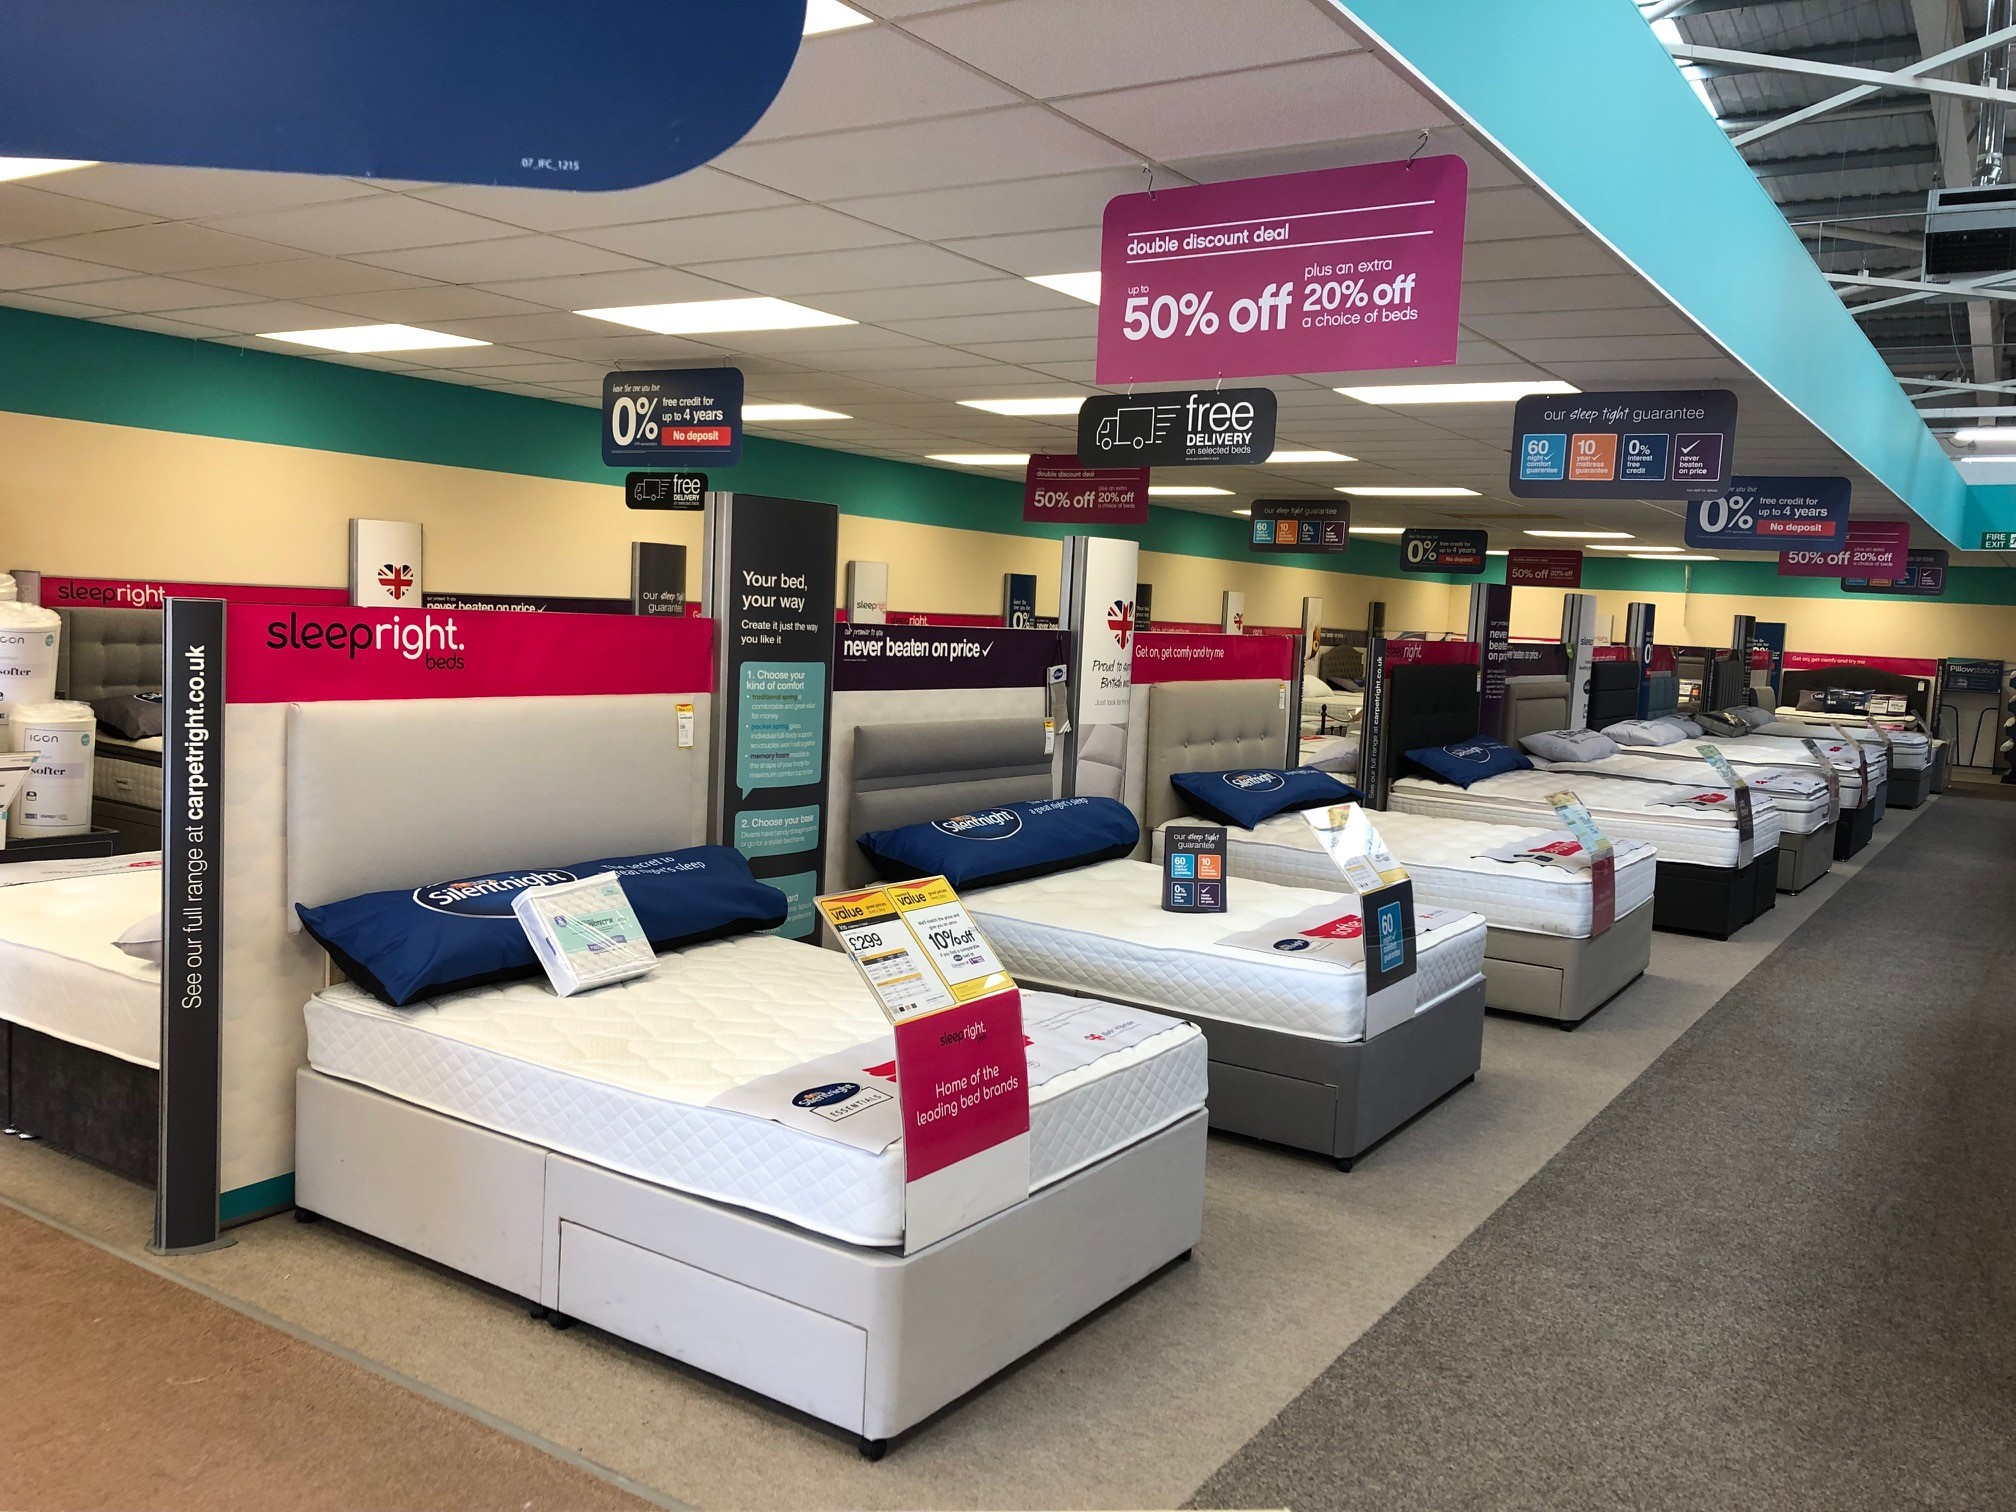 Carpetright Altrincham | Carpet, Flooring and Beds in Altrincham Cheshire